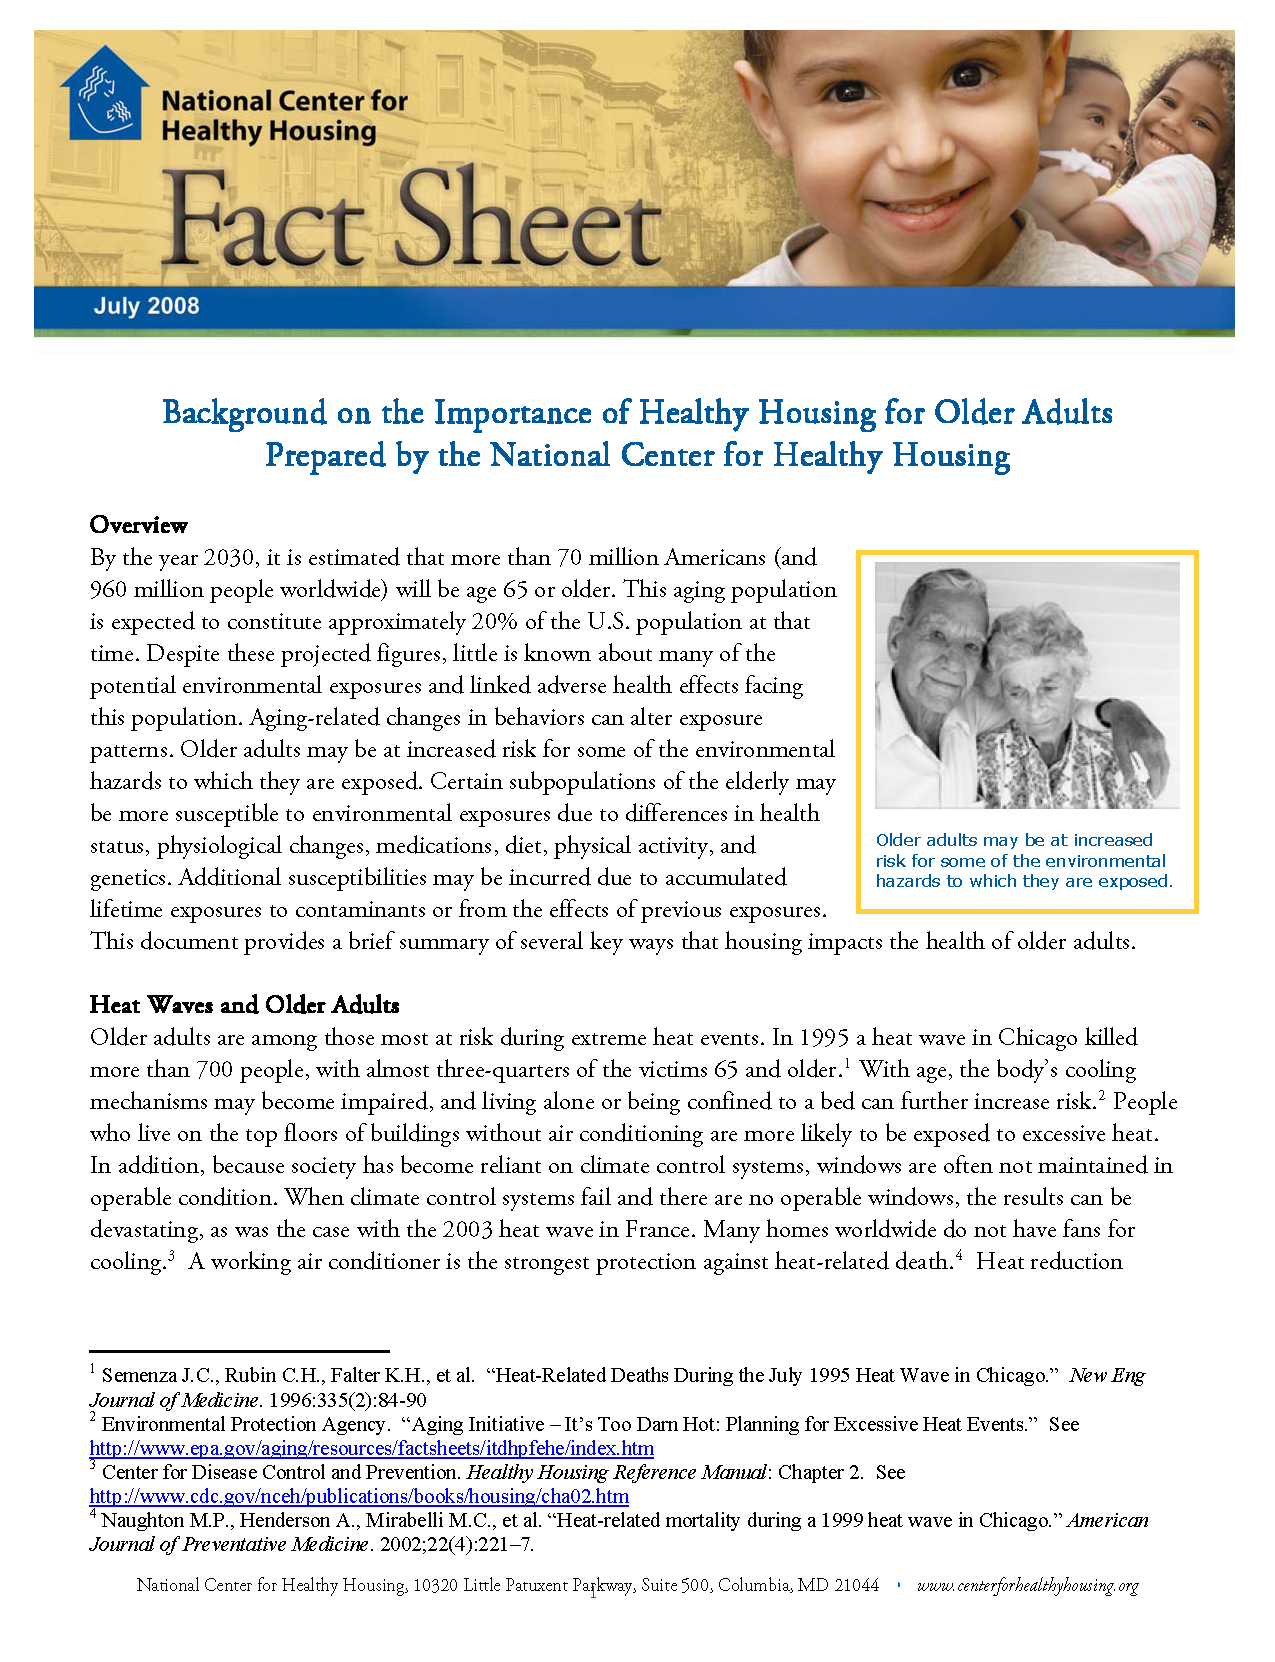 Background on the Importance of Healthy Housing for Older Adults